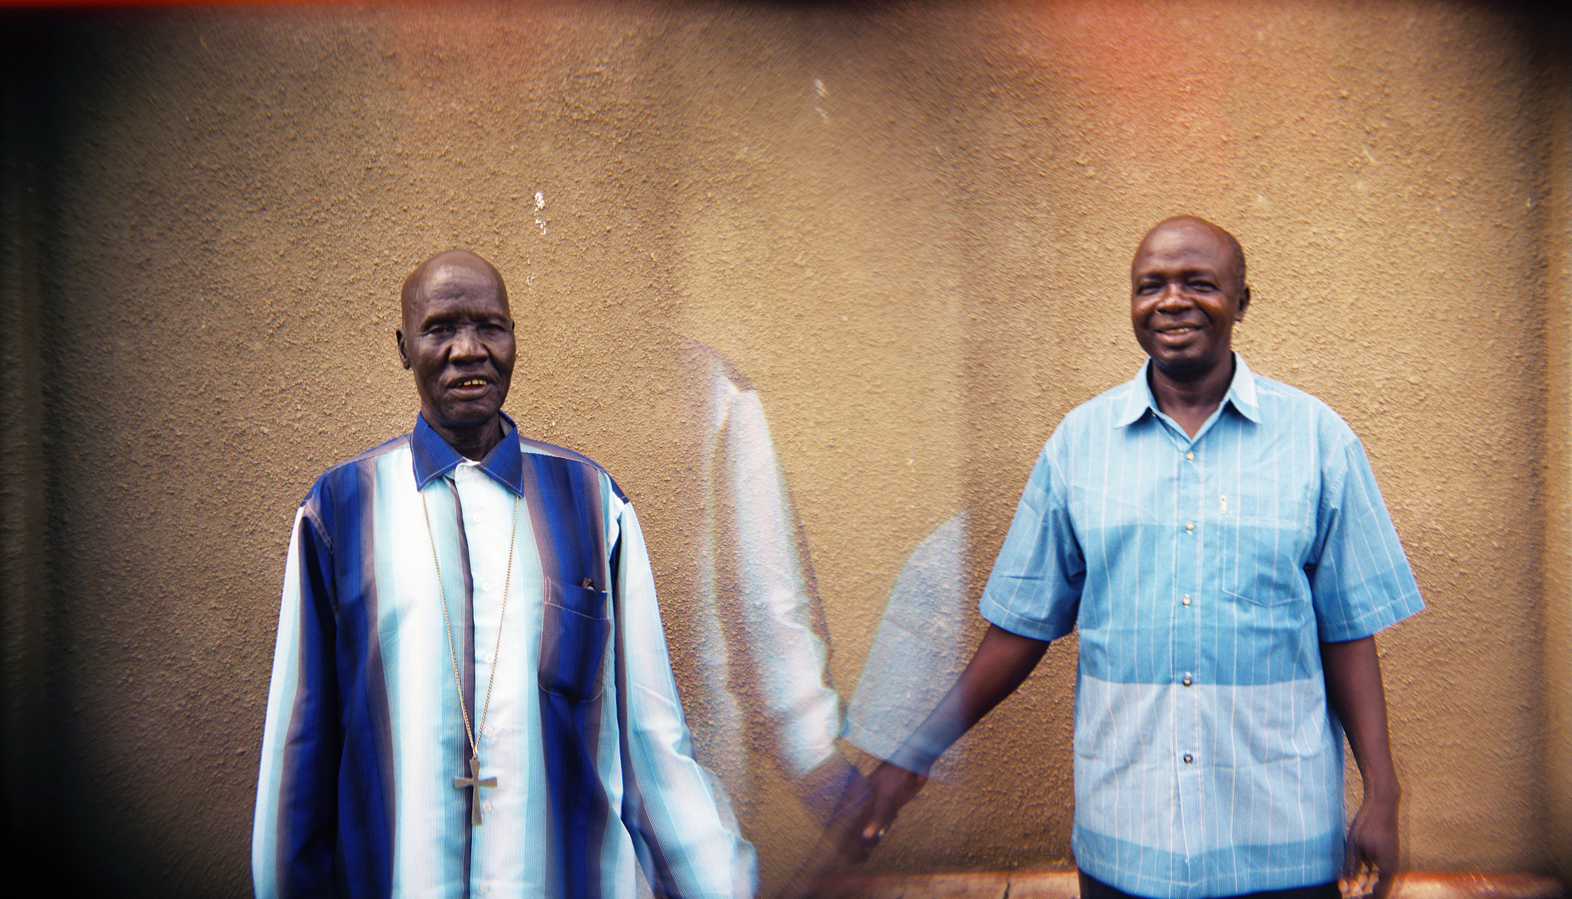 (L) Bishop Isaac Dhieu Ati, Theologian and Teacher from Lakes State: {quote} Let the people of South Sudan stop killing each other and turn away from our bad behaviours, towards ourselves. Let us forgive one another immediately without any delay.{quote}(R) James Sebit Friday, Pastor and Reconciliation Coordinator from Western Equatoria: {quote}We the people of South Sudan should learn to coexist in spite of the different tribes we come from. Our differences are a gift from God who created us this way, let us respect each other.{quote}